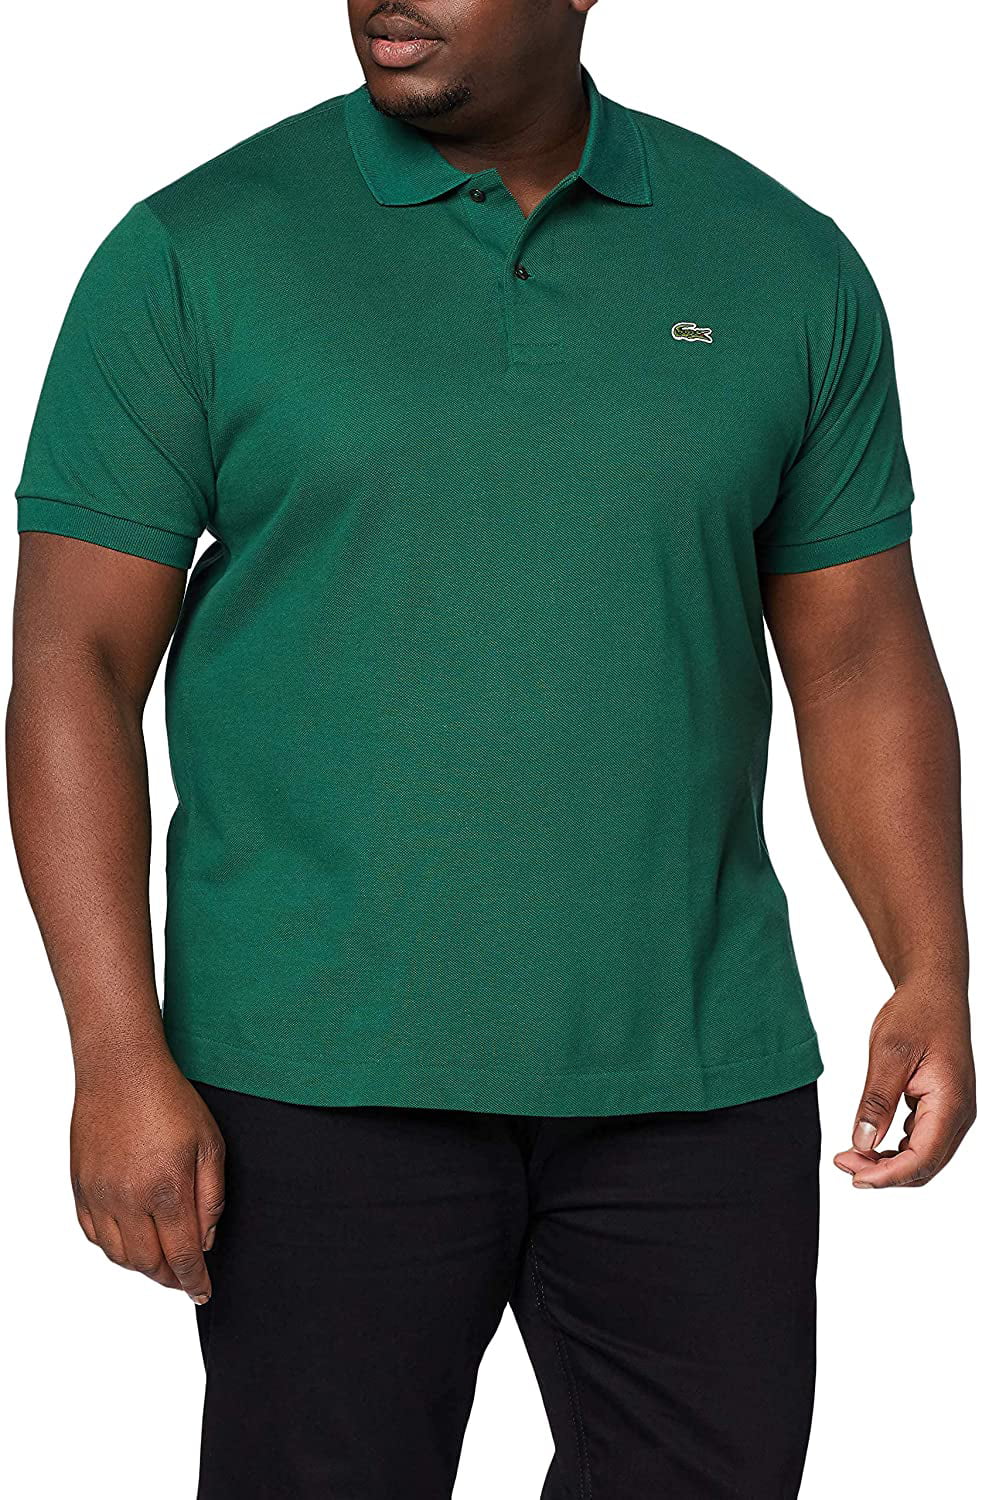 Lacoste Mens Short Sleeve Discontinued L.12.12 Pique Polo Shirt Large Green